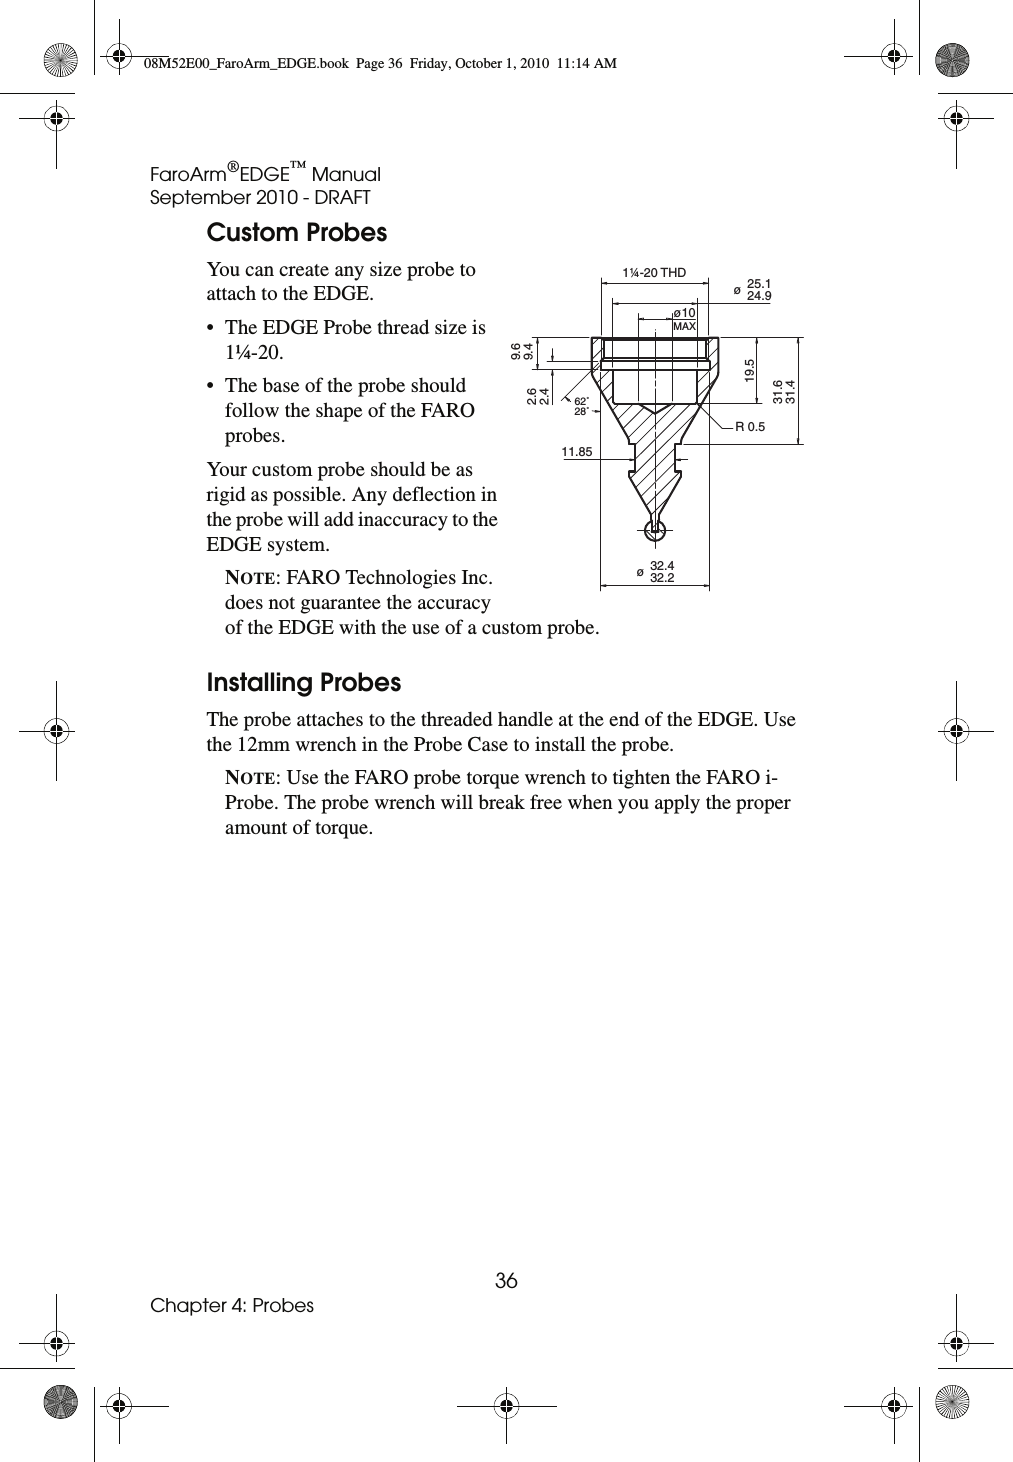 FaroArm®EDGE™ ManualSeptember 2010 - DRAFT36Chapter 4: ProbesCustom ProbesYou can create any size probe to attach to the EDGE.• The EDGE Probe thread size is 1¼-20.• The base of the probe should follow the shape of the FARO probes.Your custom probe should be as rigid as possible. Any deflection in the probe will add inaccuracy to the EDGE system.NOTE: FARO Technologies Inc. does not guarantee the accuracy of the EDGE with the use of a custom probe.Installing ProbesThe probe attaches to the threaded handle at the end of the EDGE. Use the 12mm wrench in the Probe Case to install the probe.NOTE: Use the FARO probe torque wrench to tighten the FARO i-Probe. The probe wrench will break free when you apply the proper amount of torque. 1¼-20 THD11.85R 0.519.5øø10MAX25.1 24.9ø32.4 32.262˚28˚31.631.49.69.42.62.408M52E00_FaroArm_EDGE.book  Page 36  Friday, October 1, 2010  11:14 AM